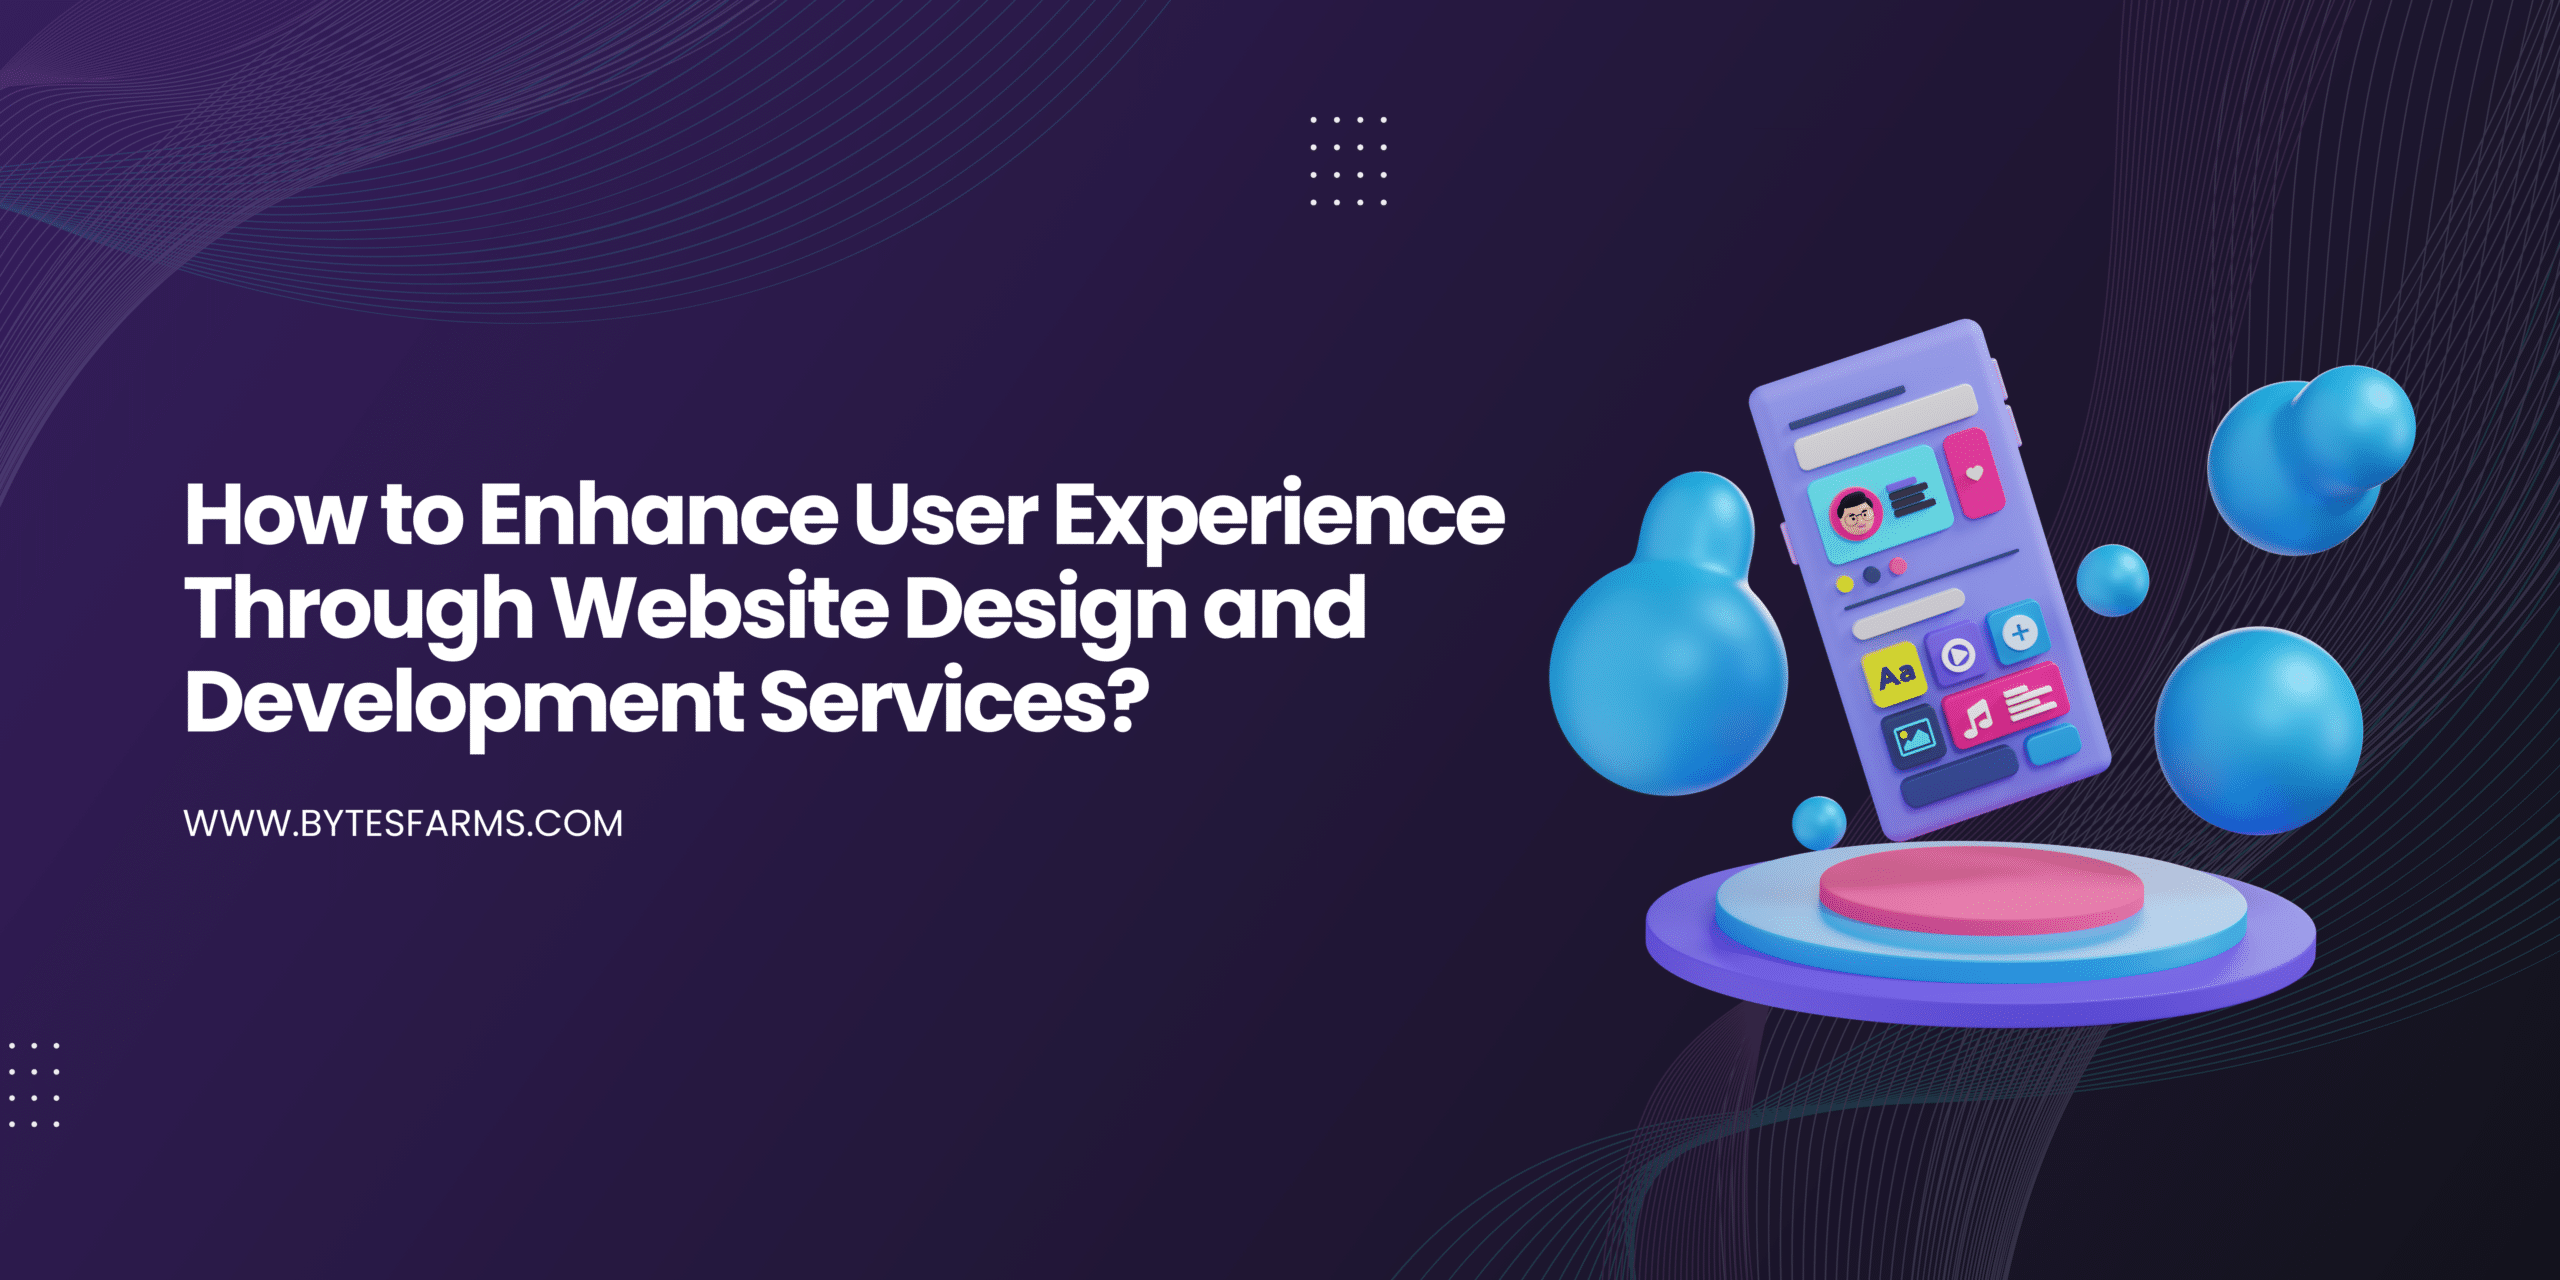 How to Enhance User Experience Through Website Design and Development Services?